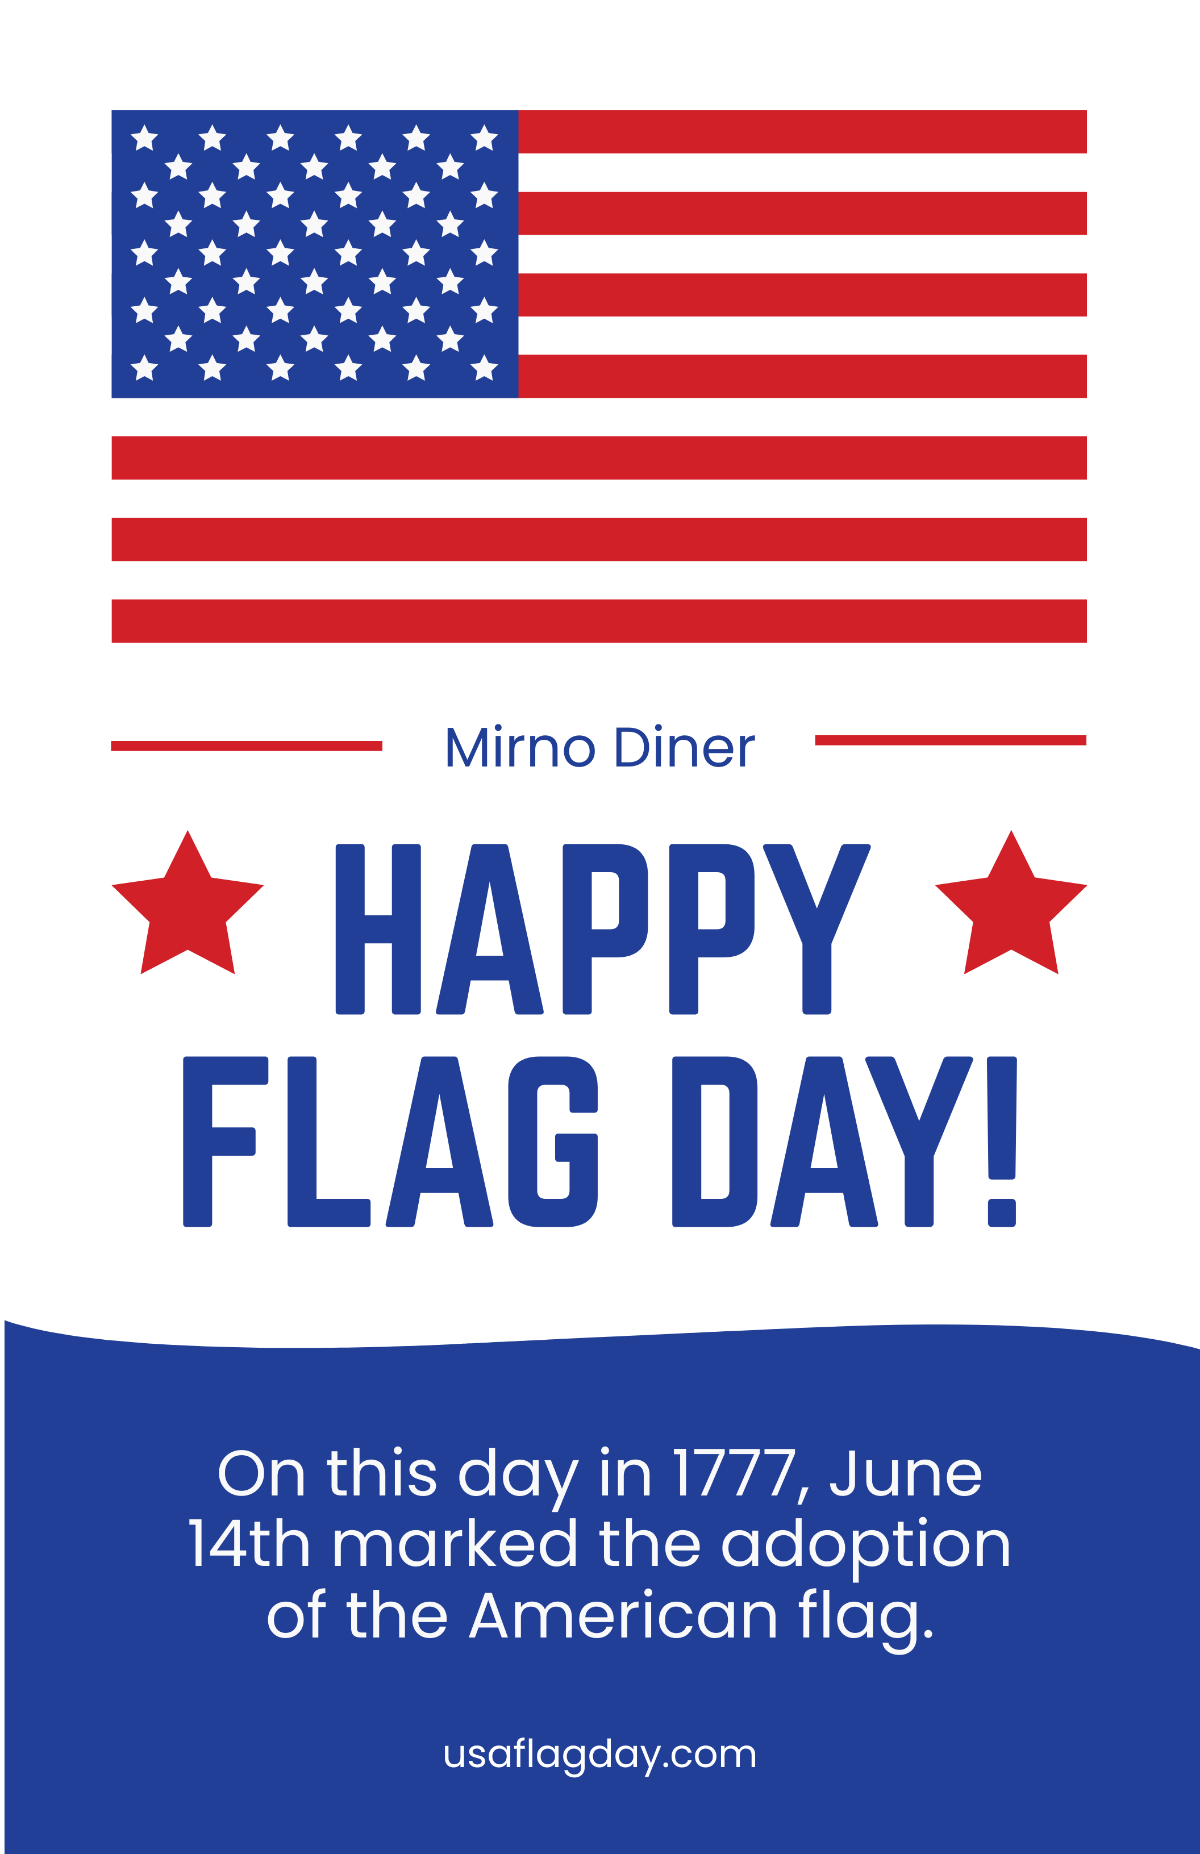 Happy Flag Day Poster